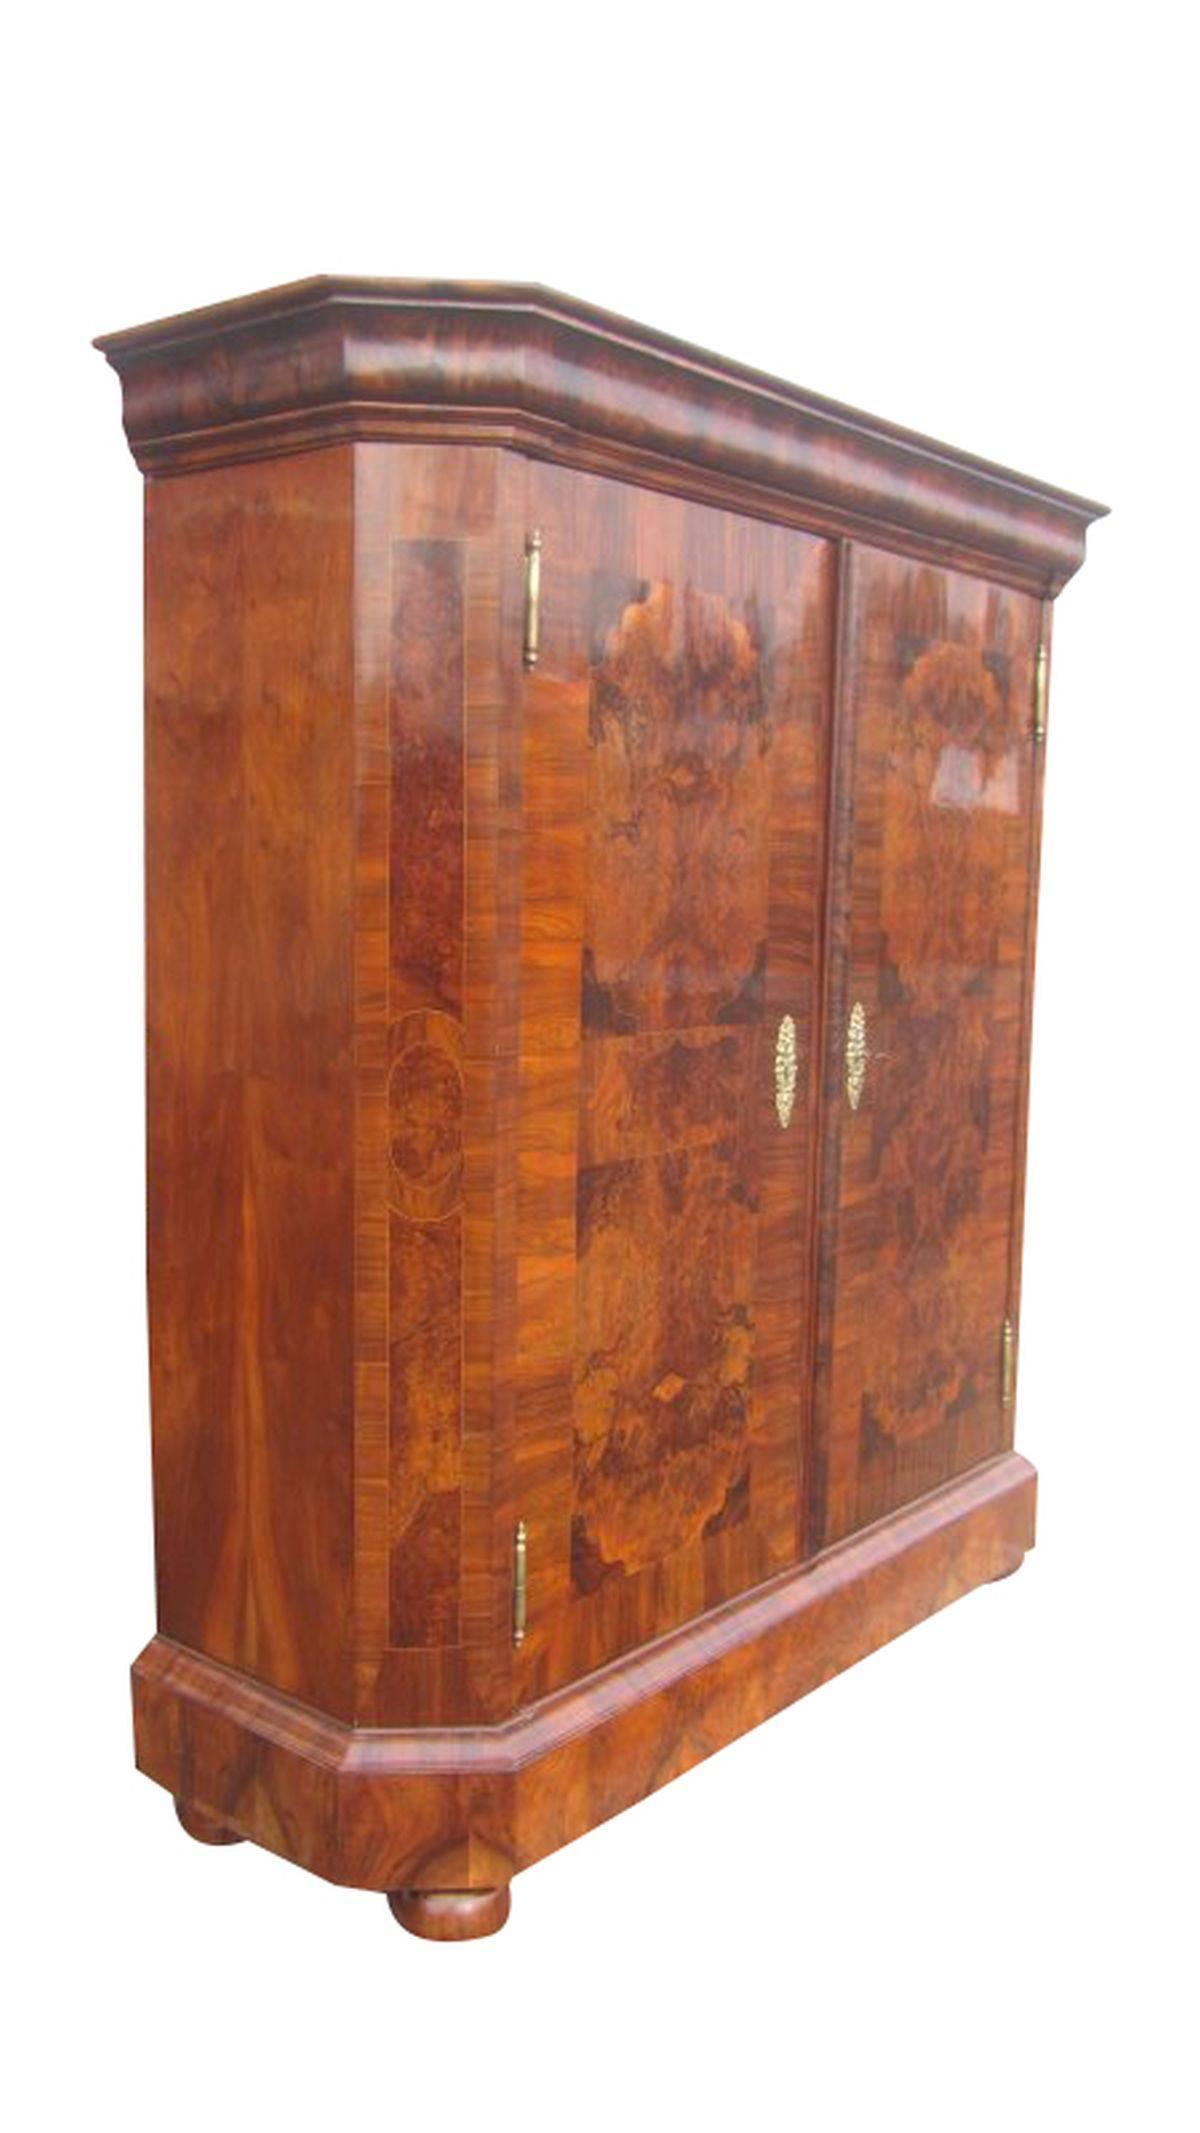 A wardrobe from the Baroque period. This piece is made of softwood and veneered with walnut wood and has birch thread inserts. The surface is hand polished and shines in a unique brown-black grain. It has original keys and keyholes. The inside was